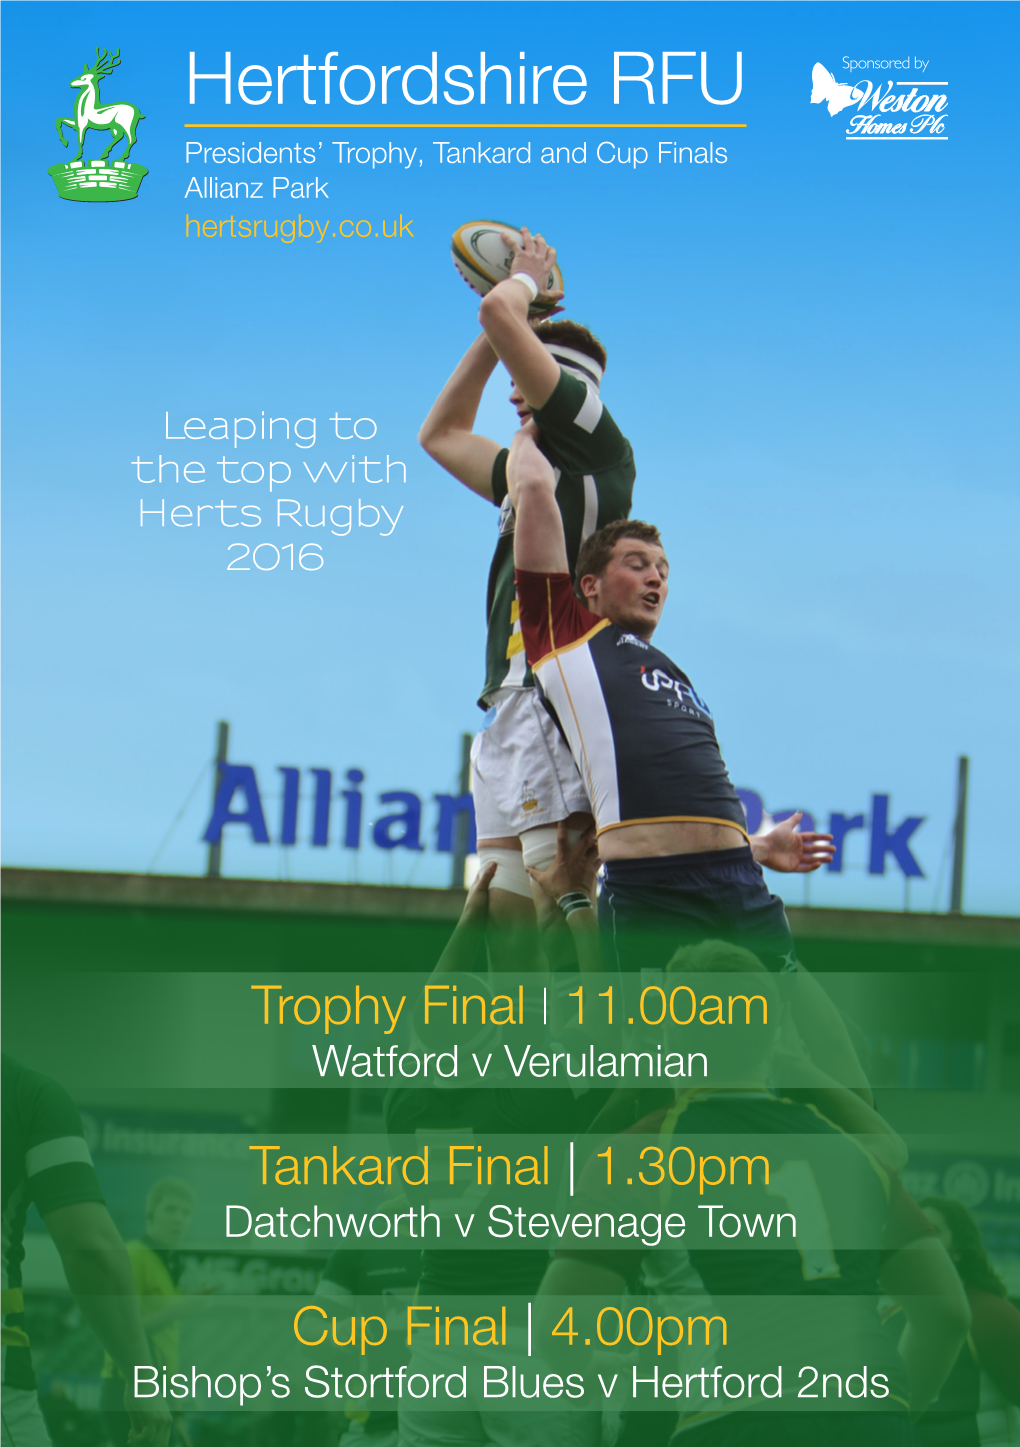 Hertfordshire RFU Sponsored by Presidents’ Trophy, Tankard and Cup Finals 7766 Allianz Park Hertsrugby.Co.Uk